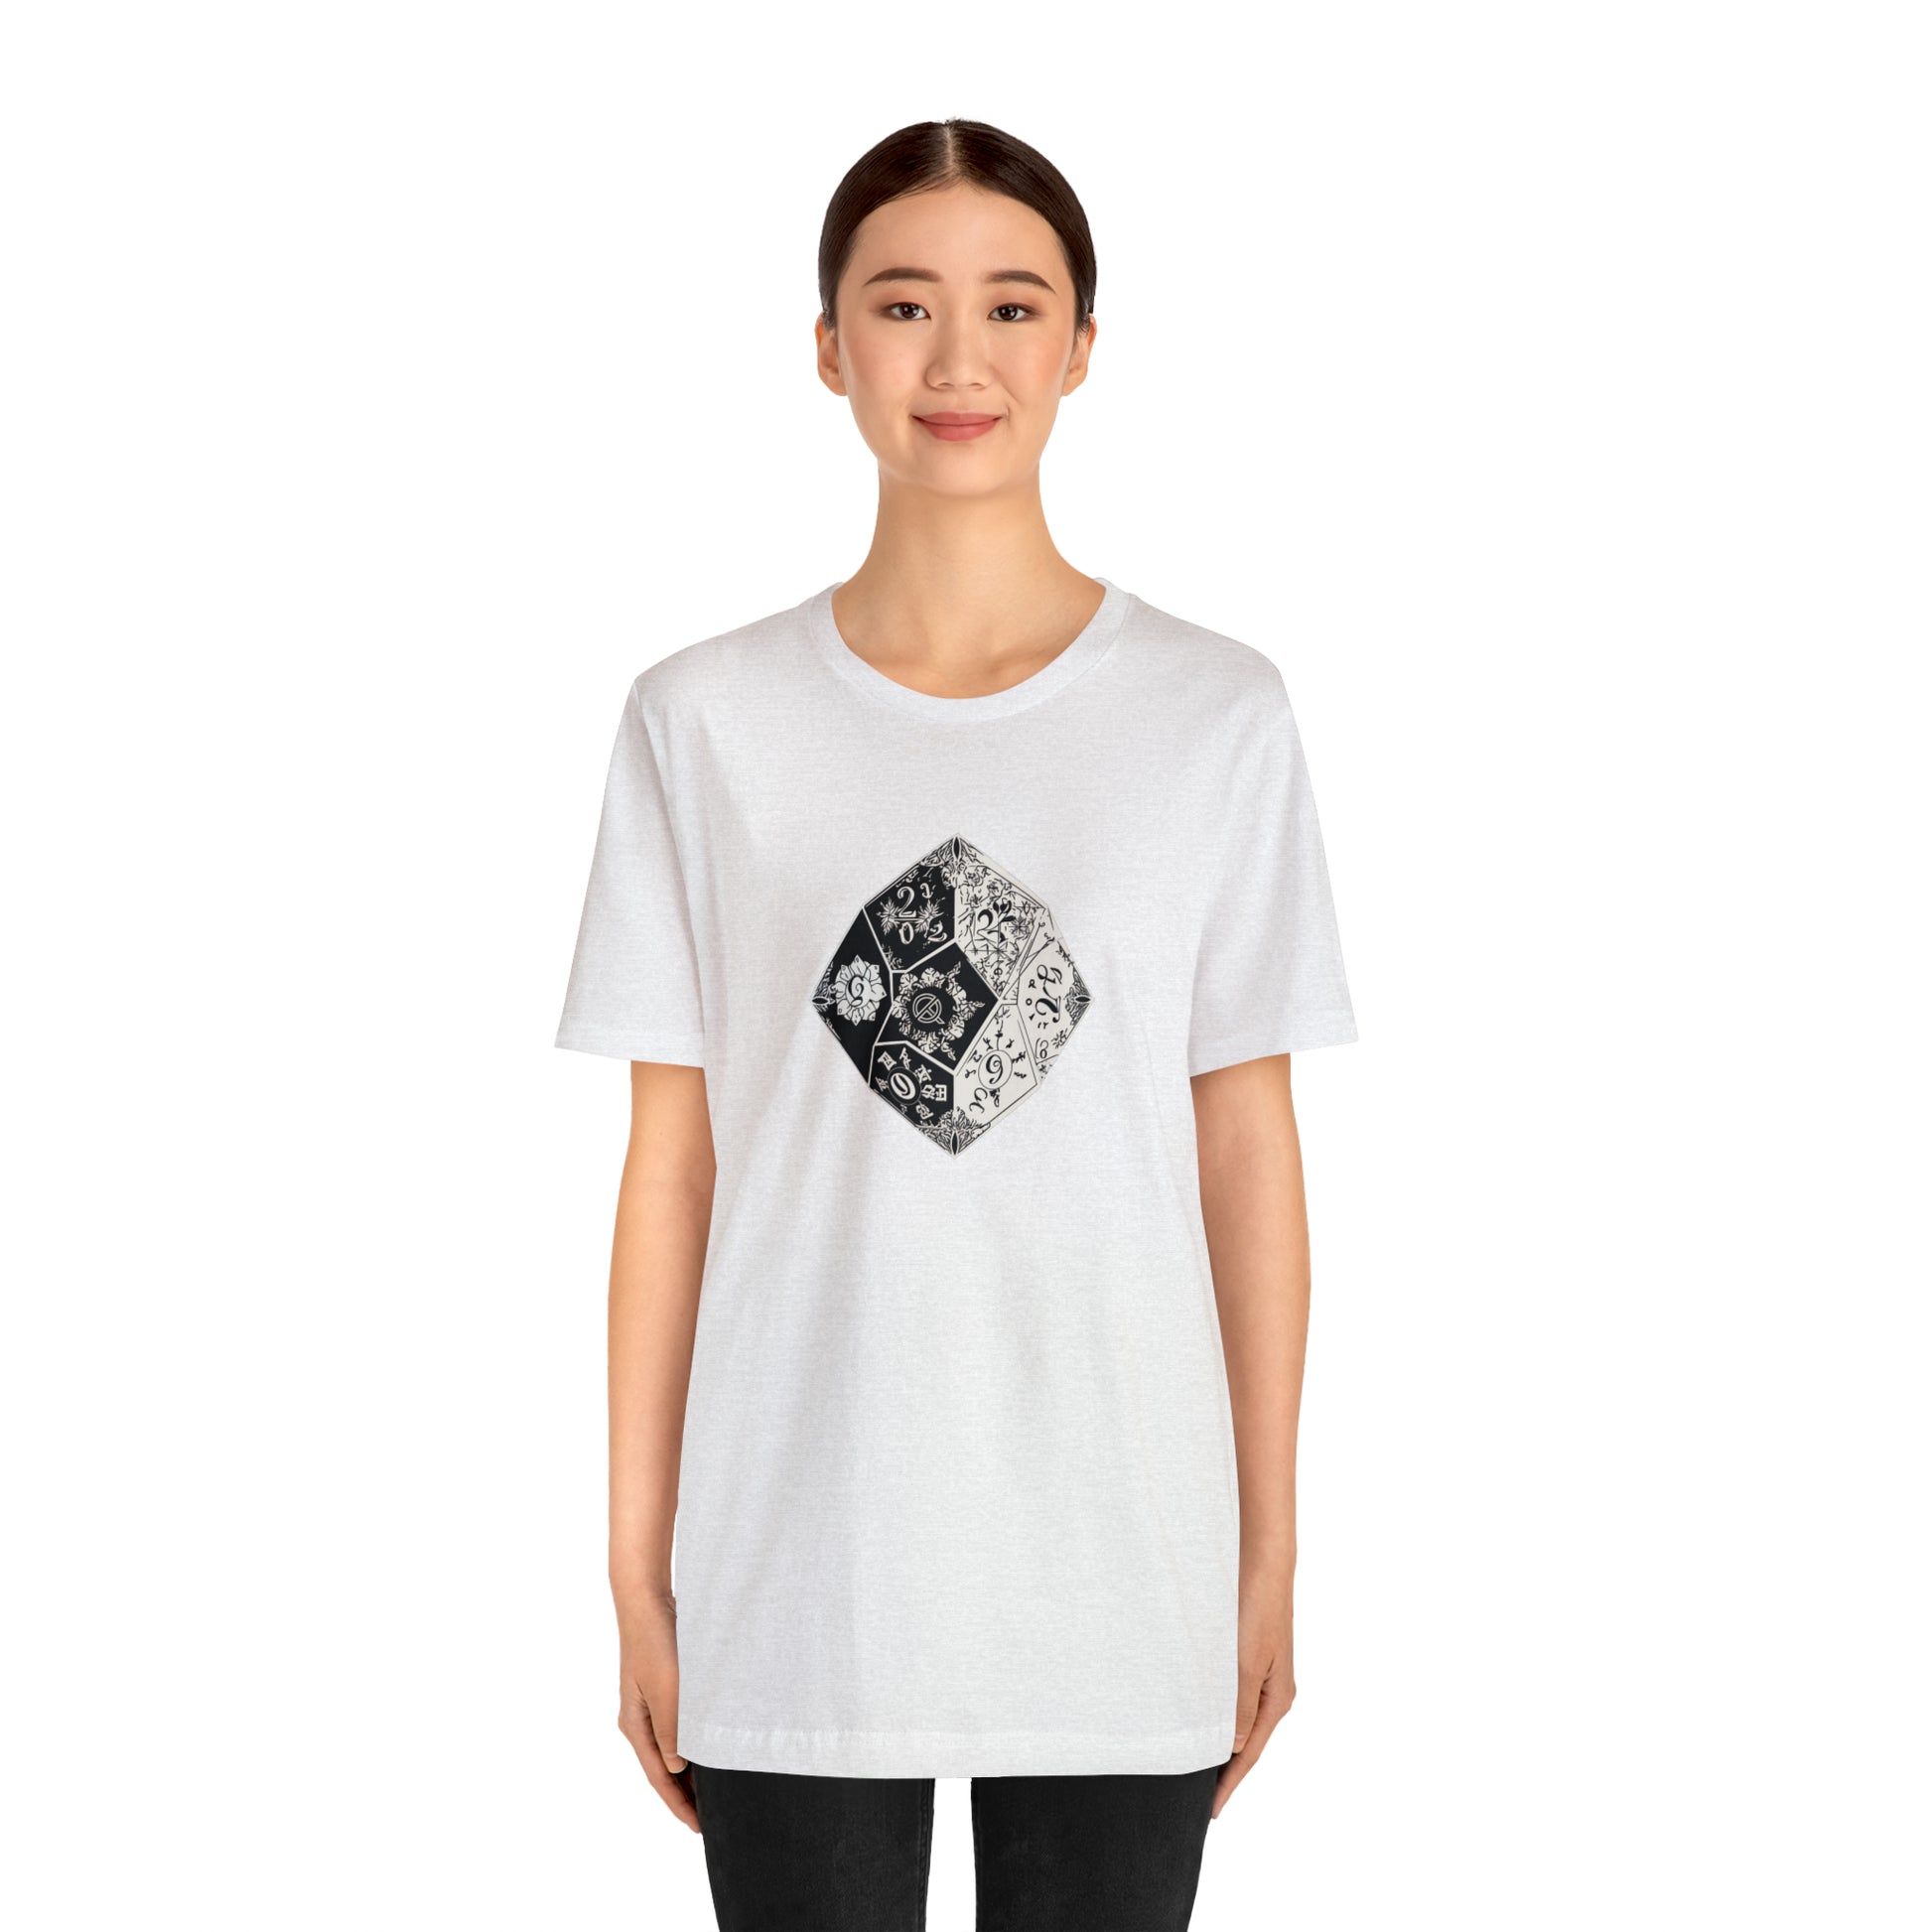 ash-quest-thread-tee-shirt-with-large-black-and-white-artistic-dice-on-center